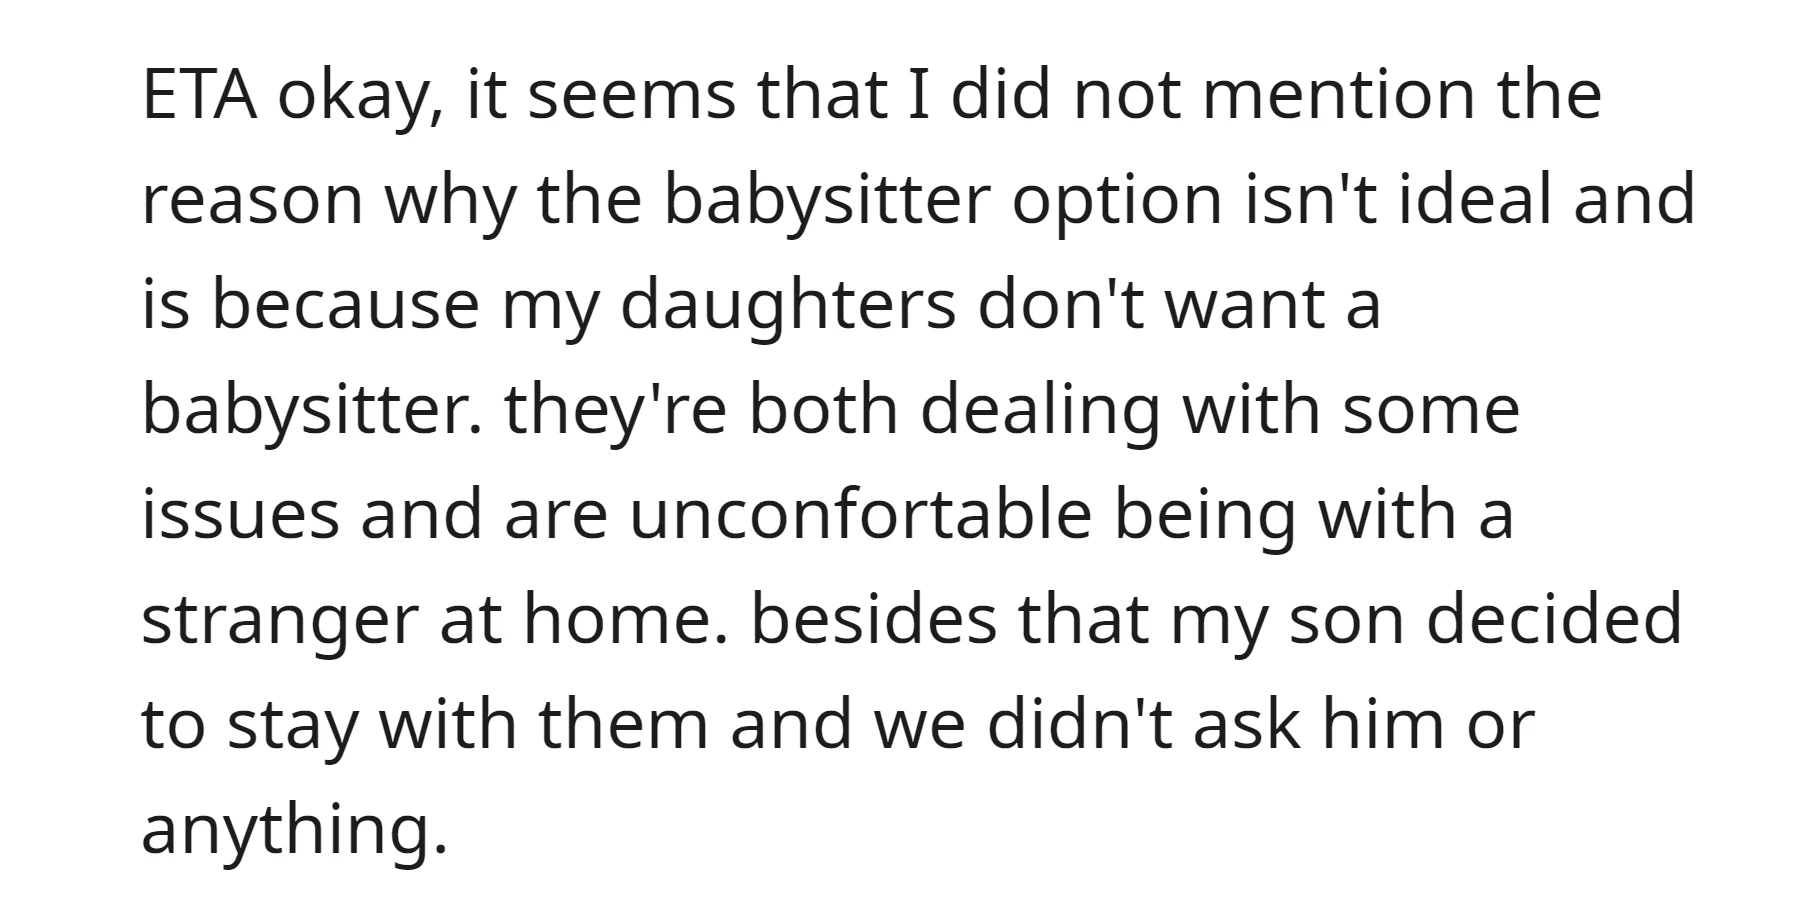 OP's daughters are uncomfortable with a babysitter